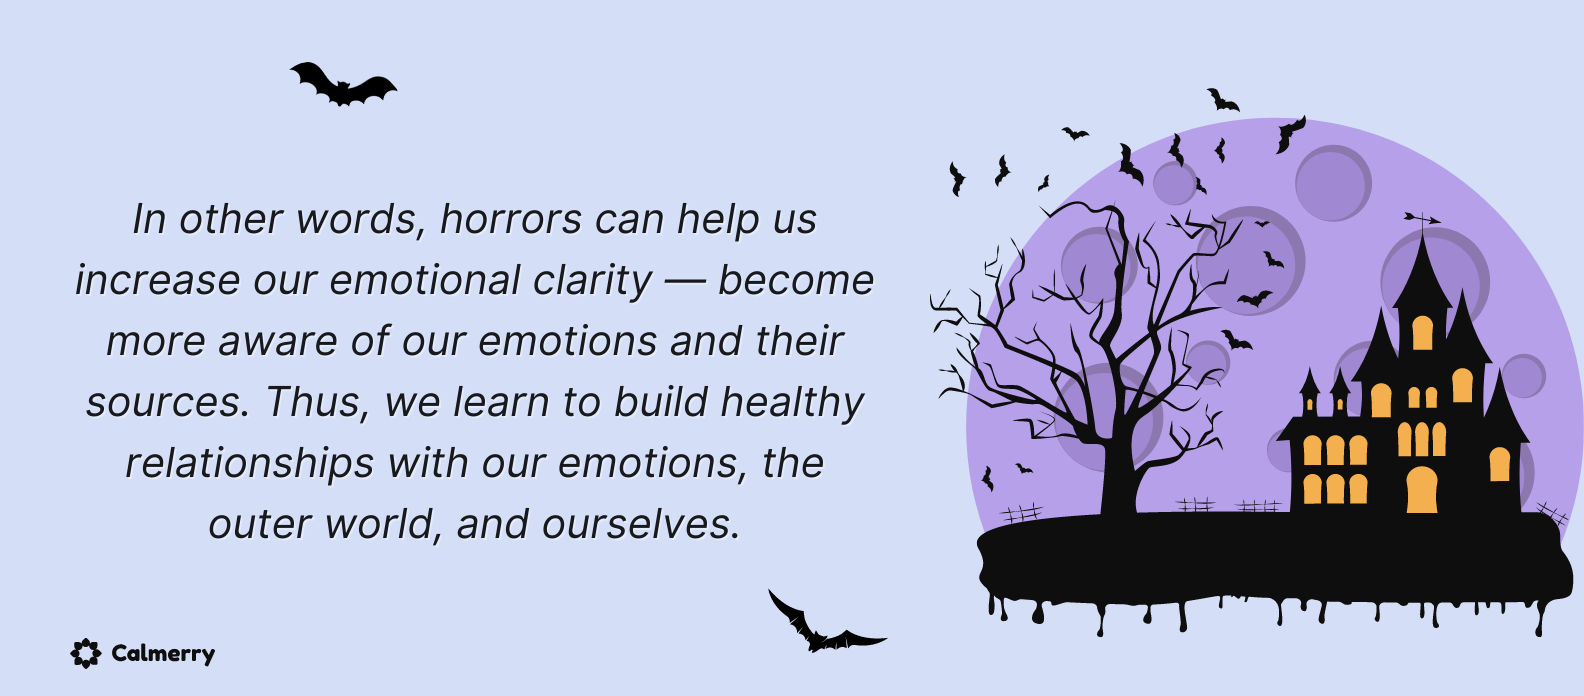 In other words, horrors can help us increase emotional clarity — be more aware of our emotions and their source. Thus, we learn to build healthy relationships with our emotions, the outer world, and ourselves.